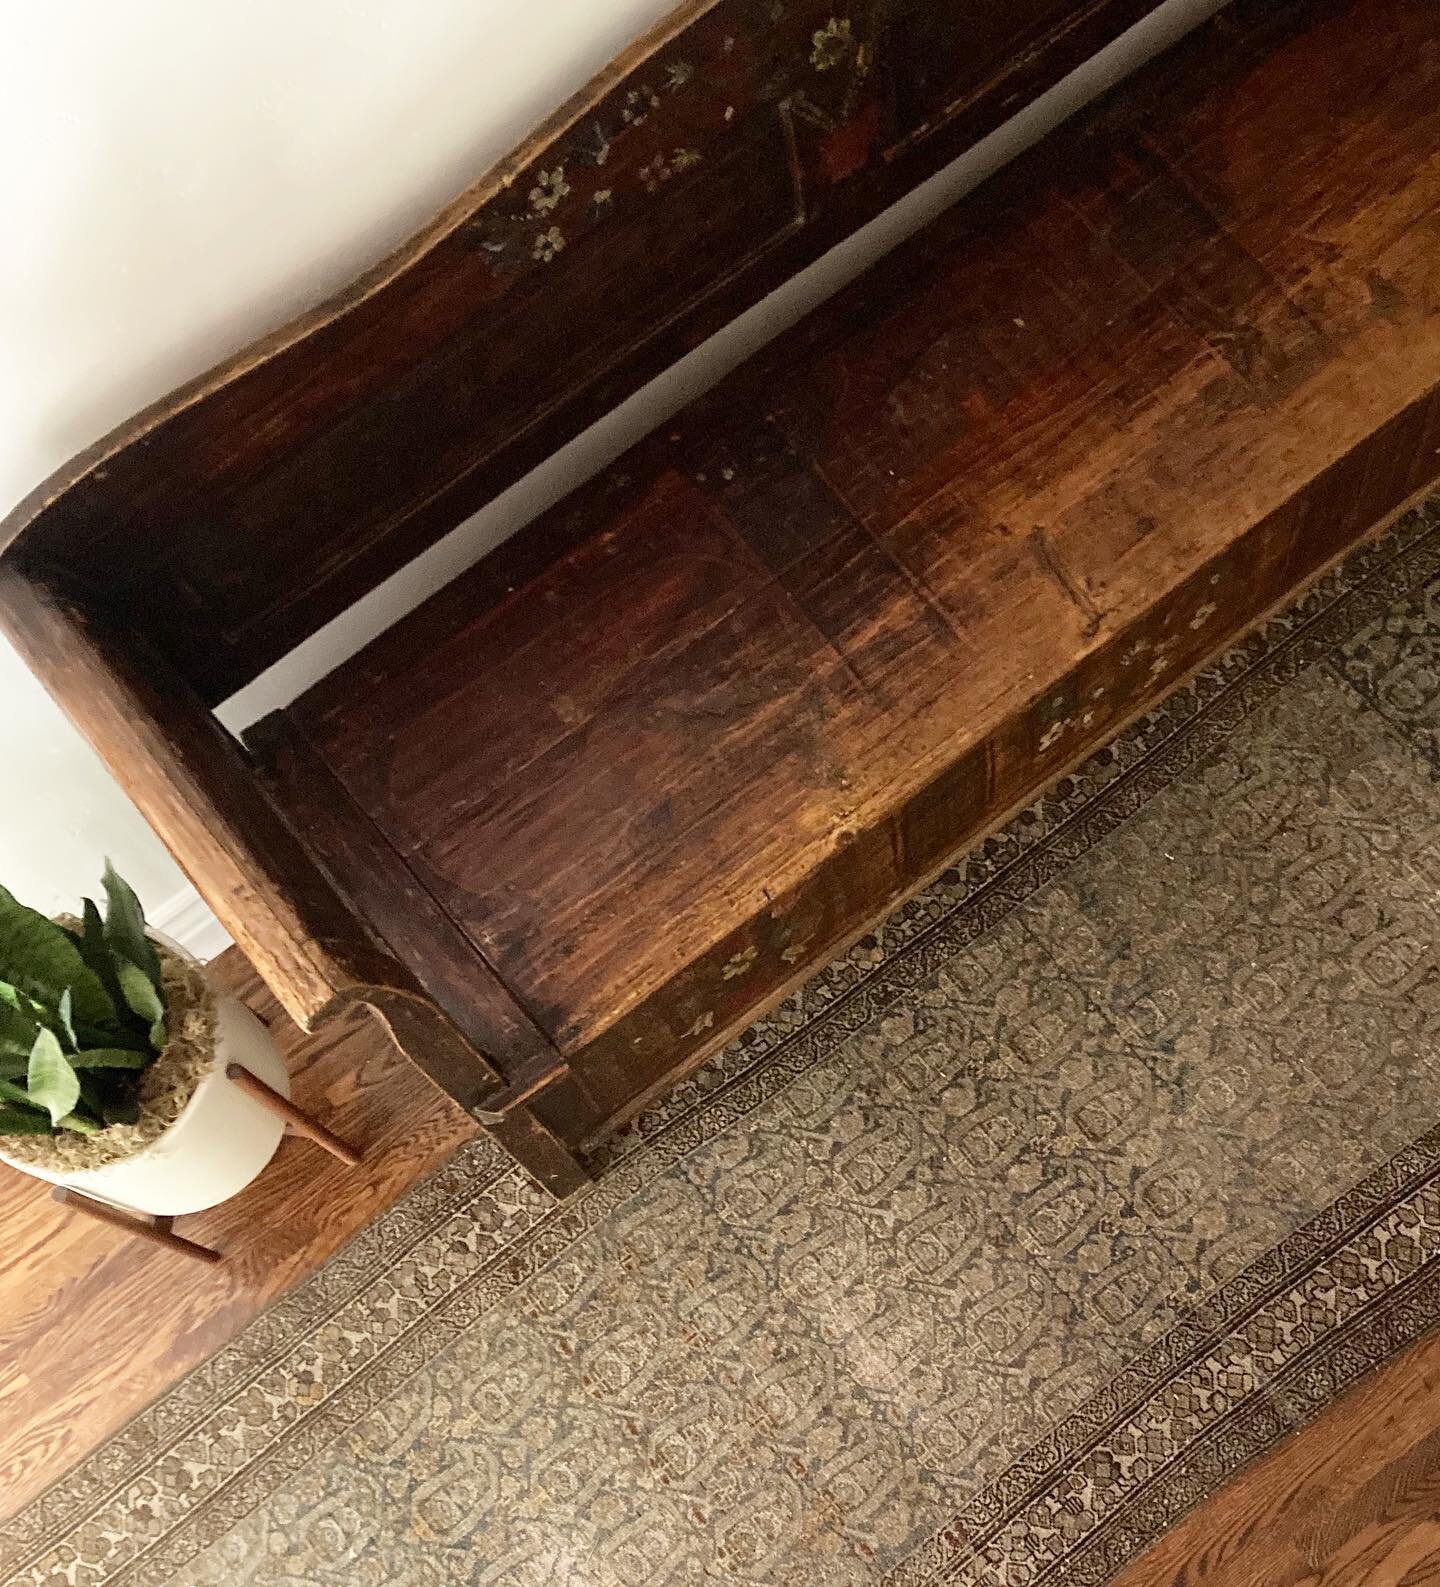 Antique Swedish bench + antique runner. #goodcombos #patinaoverperfection